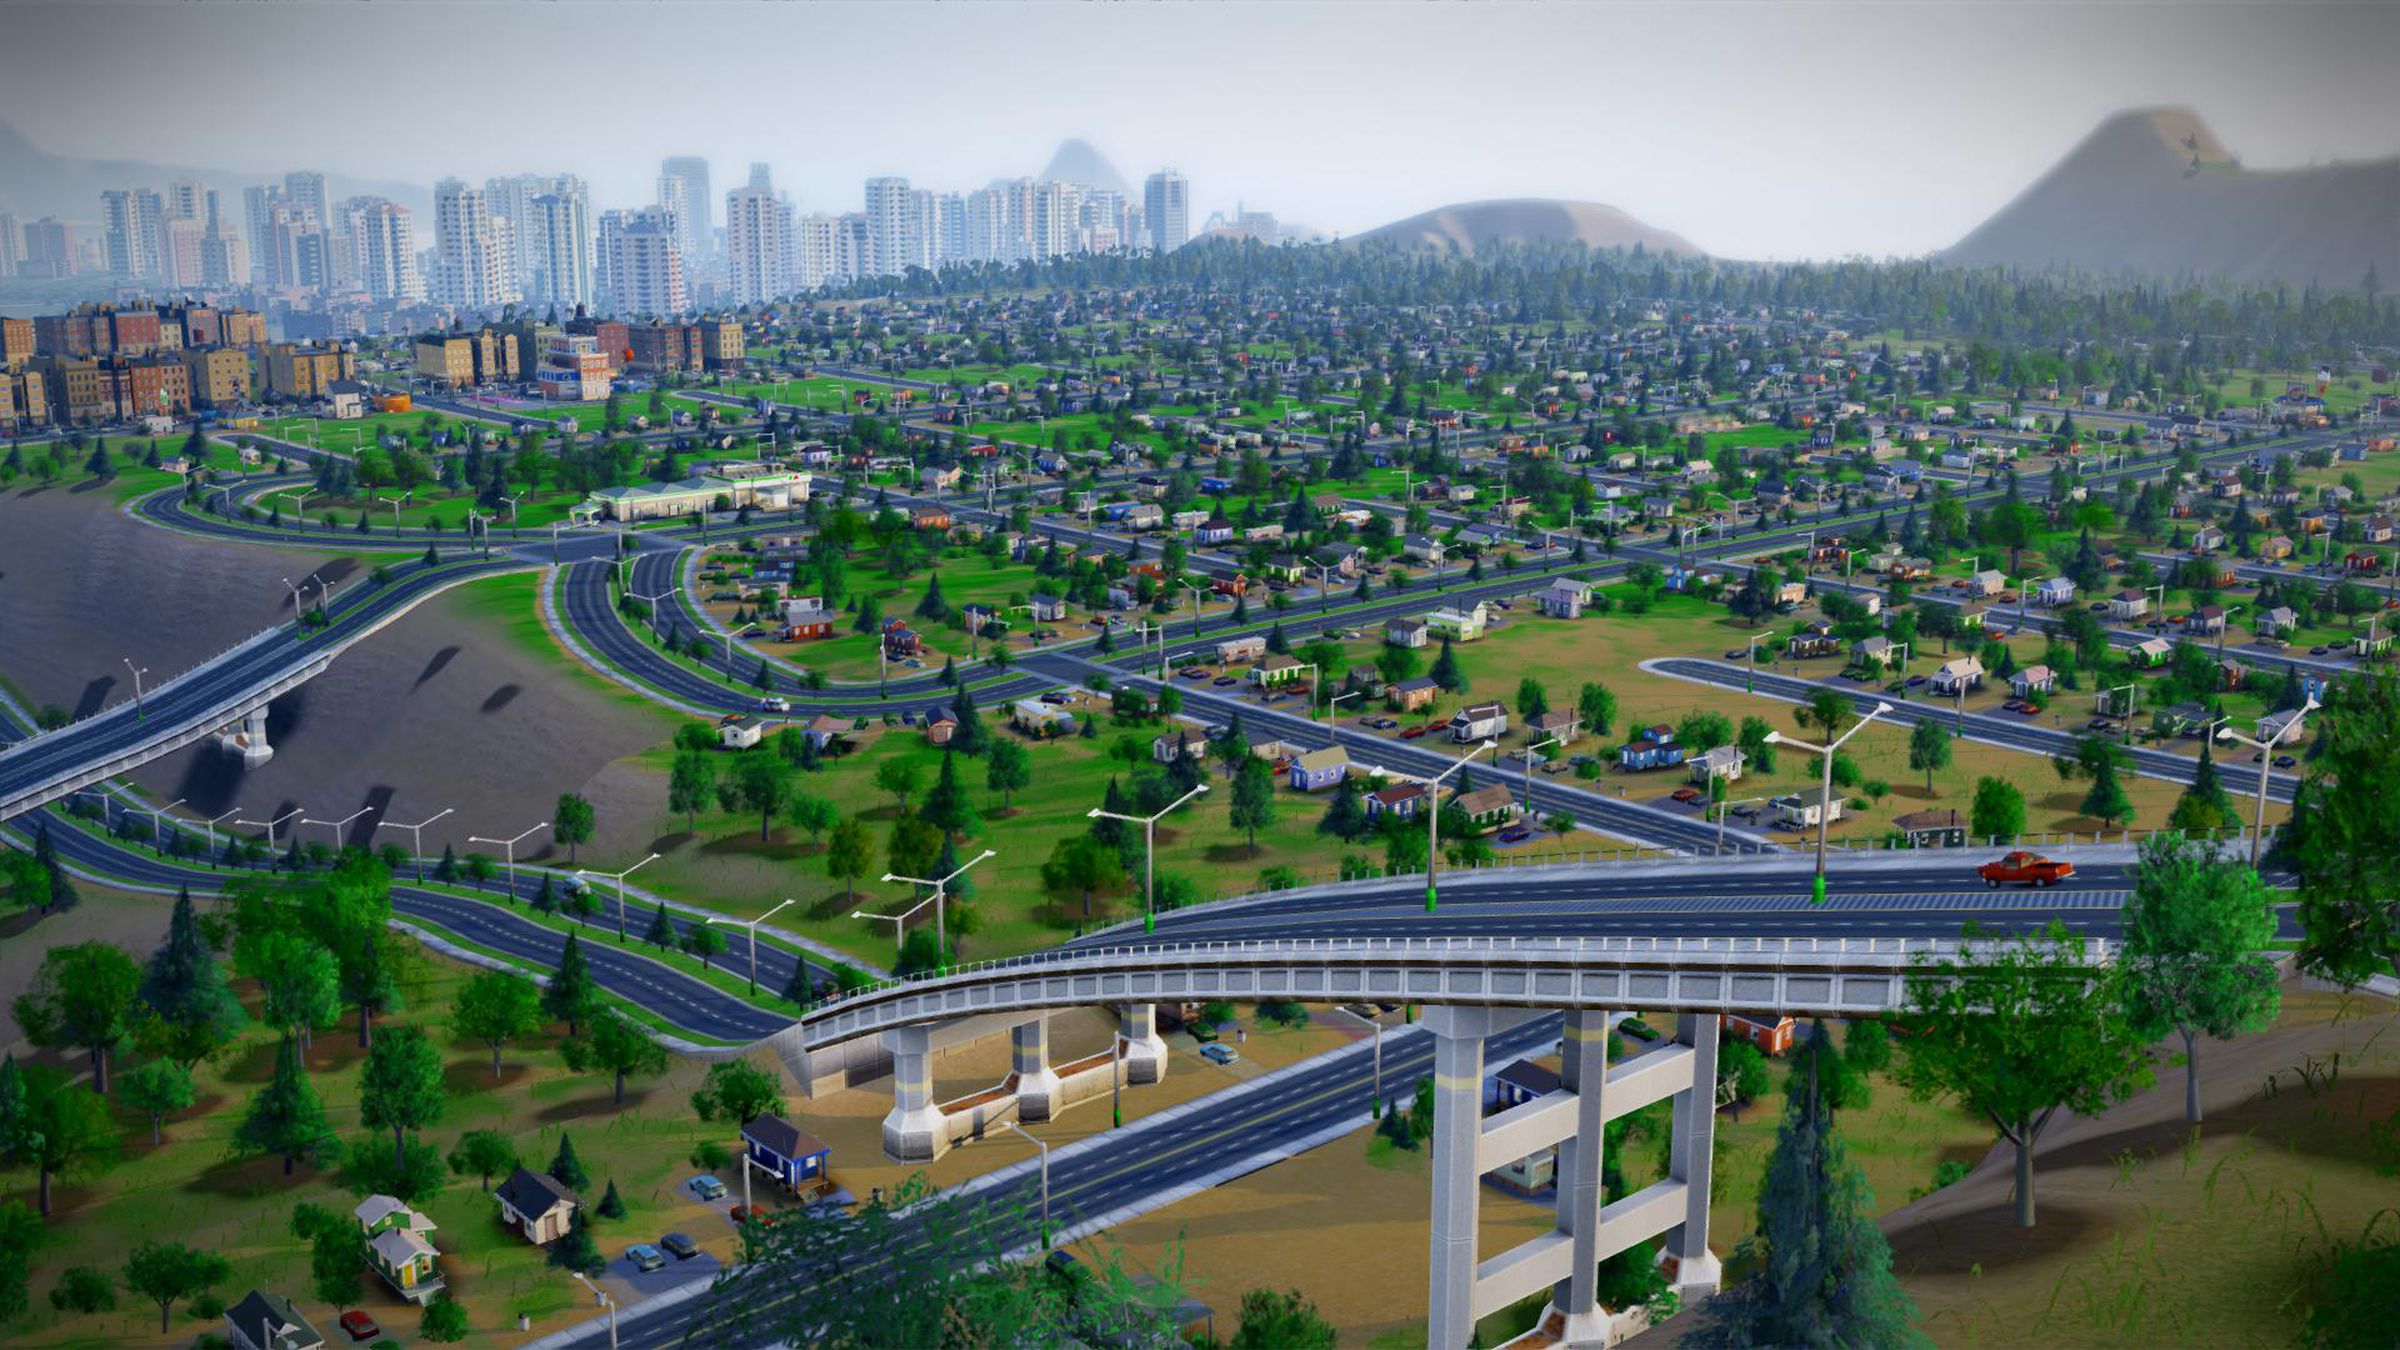 A highway running over a suburban landscape with a city and mountains in the background.